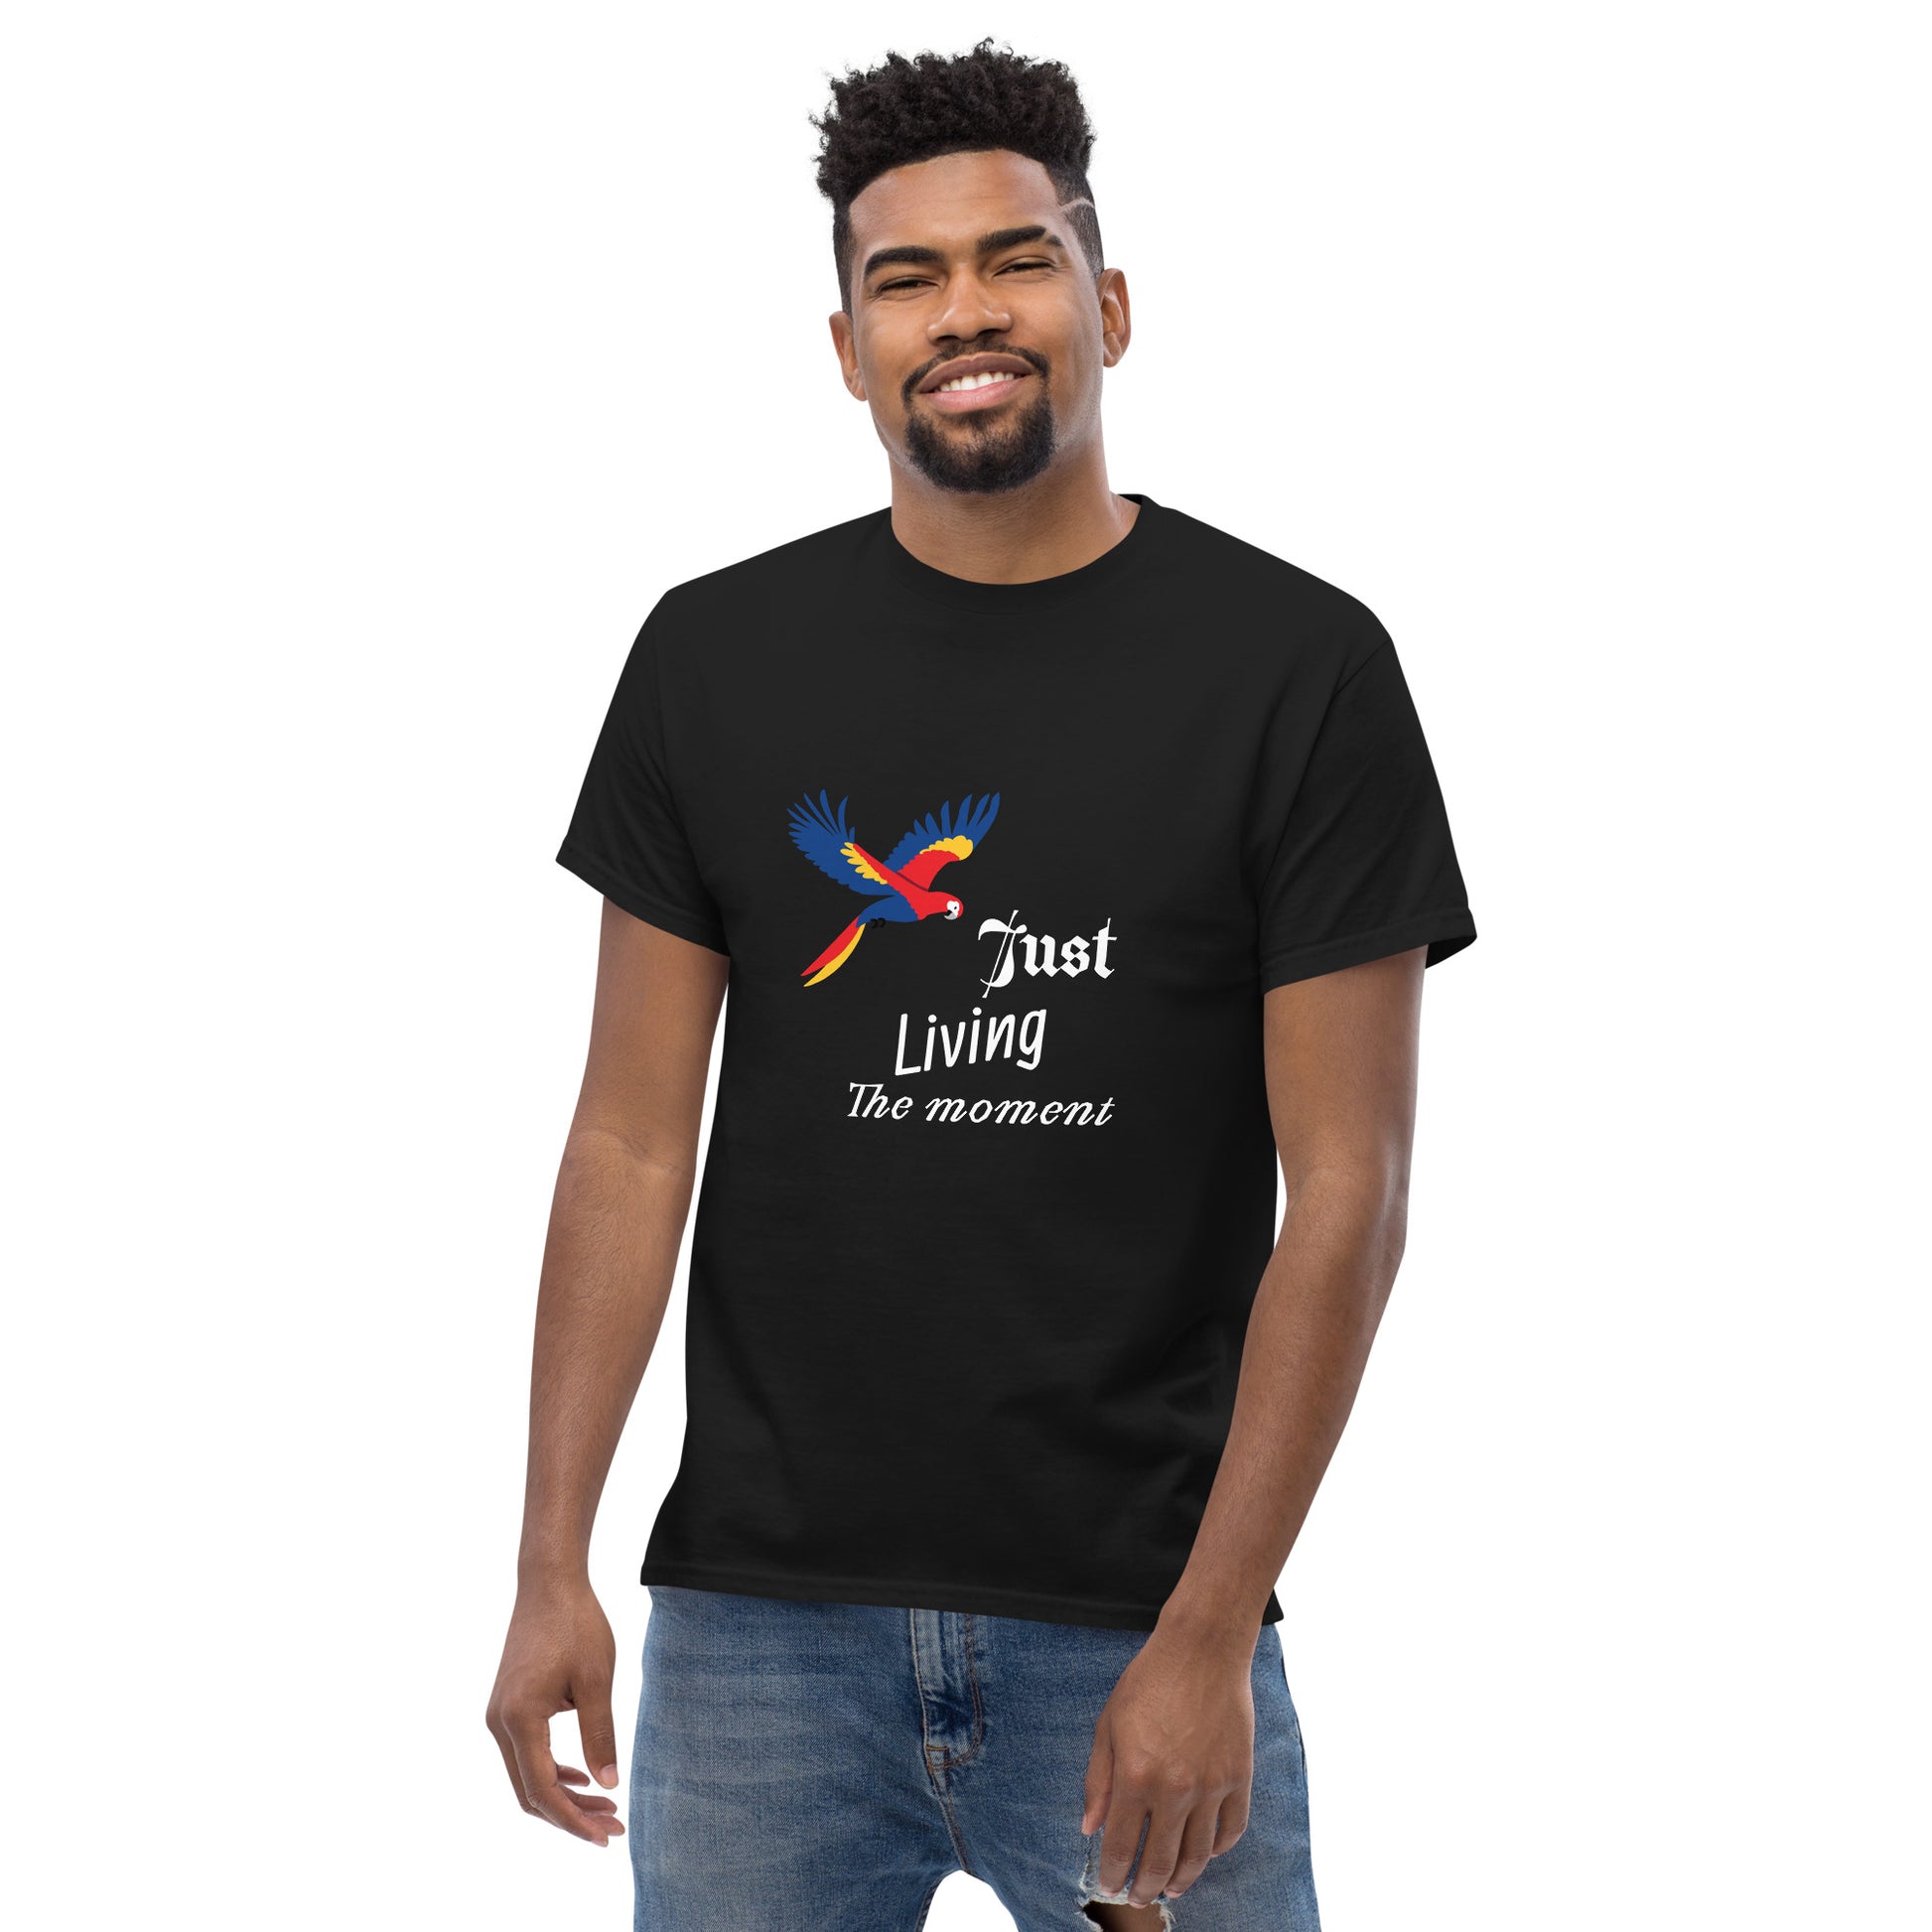 Inspirational  Men's tee, Positive quote: Just Living The Moment" motivational T-shirt, Words Of Wisdom, Motivational Clothes Unique Gift Idea for boy, brother, uncle, professor, grandfather, dad, young man